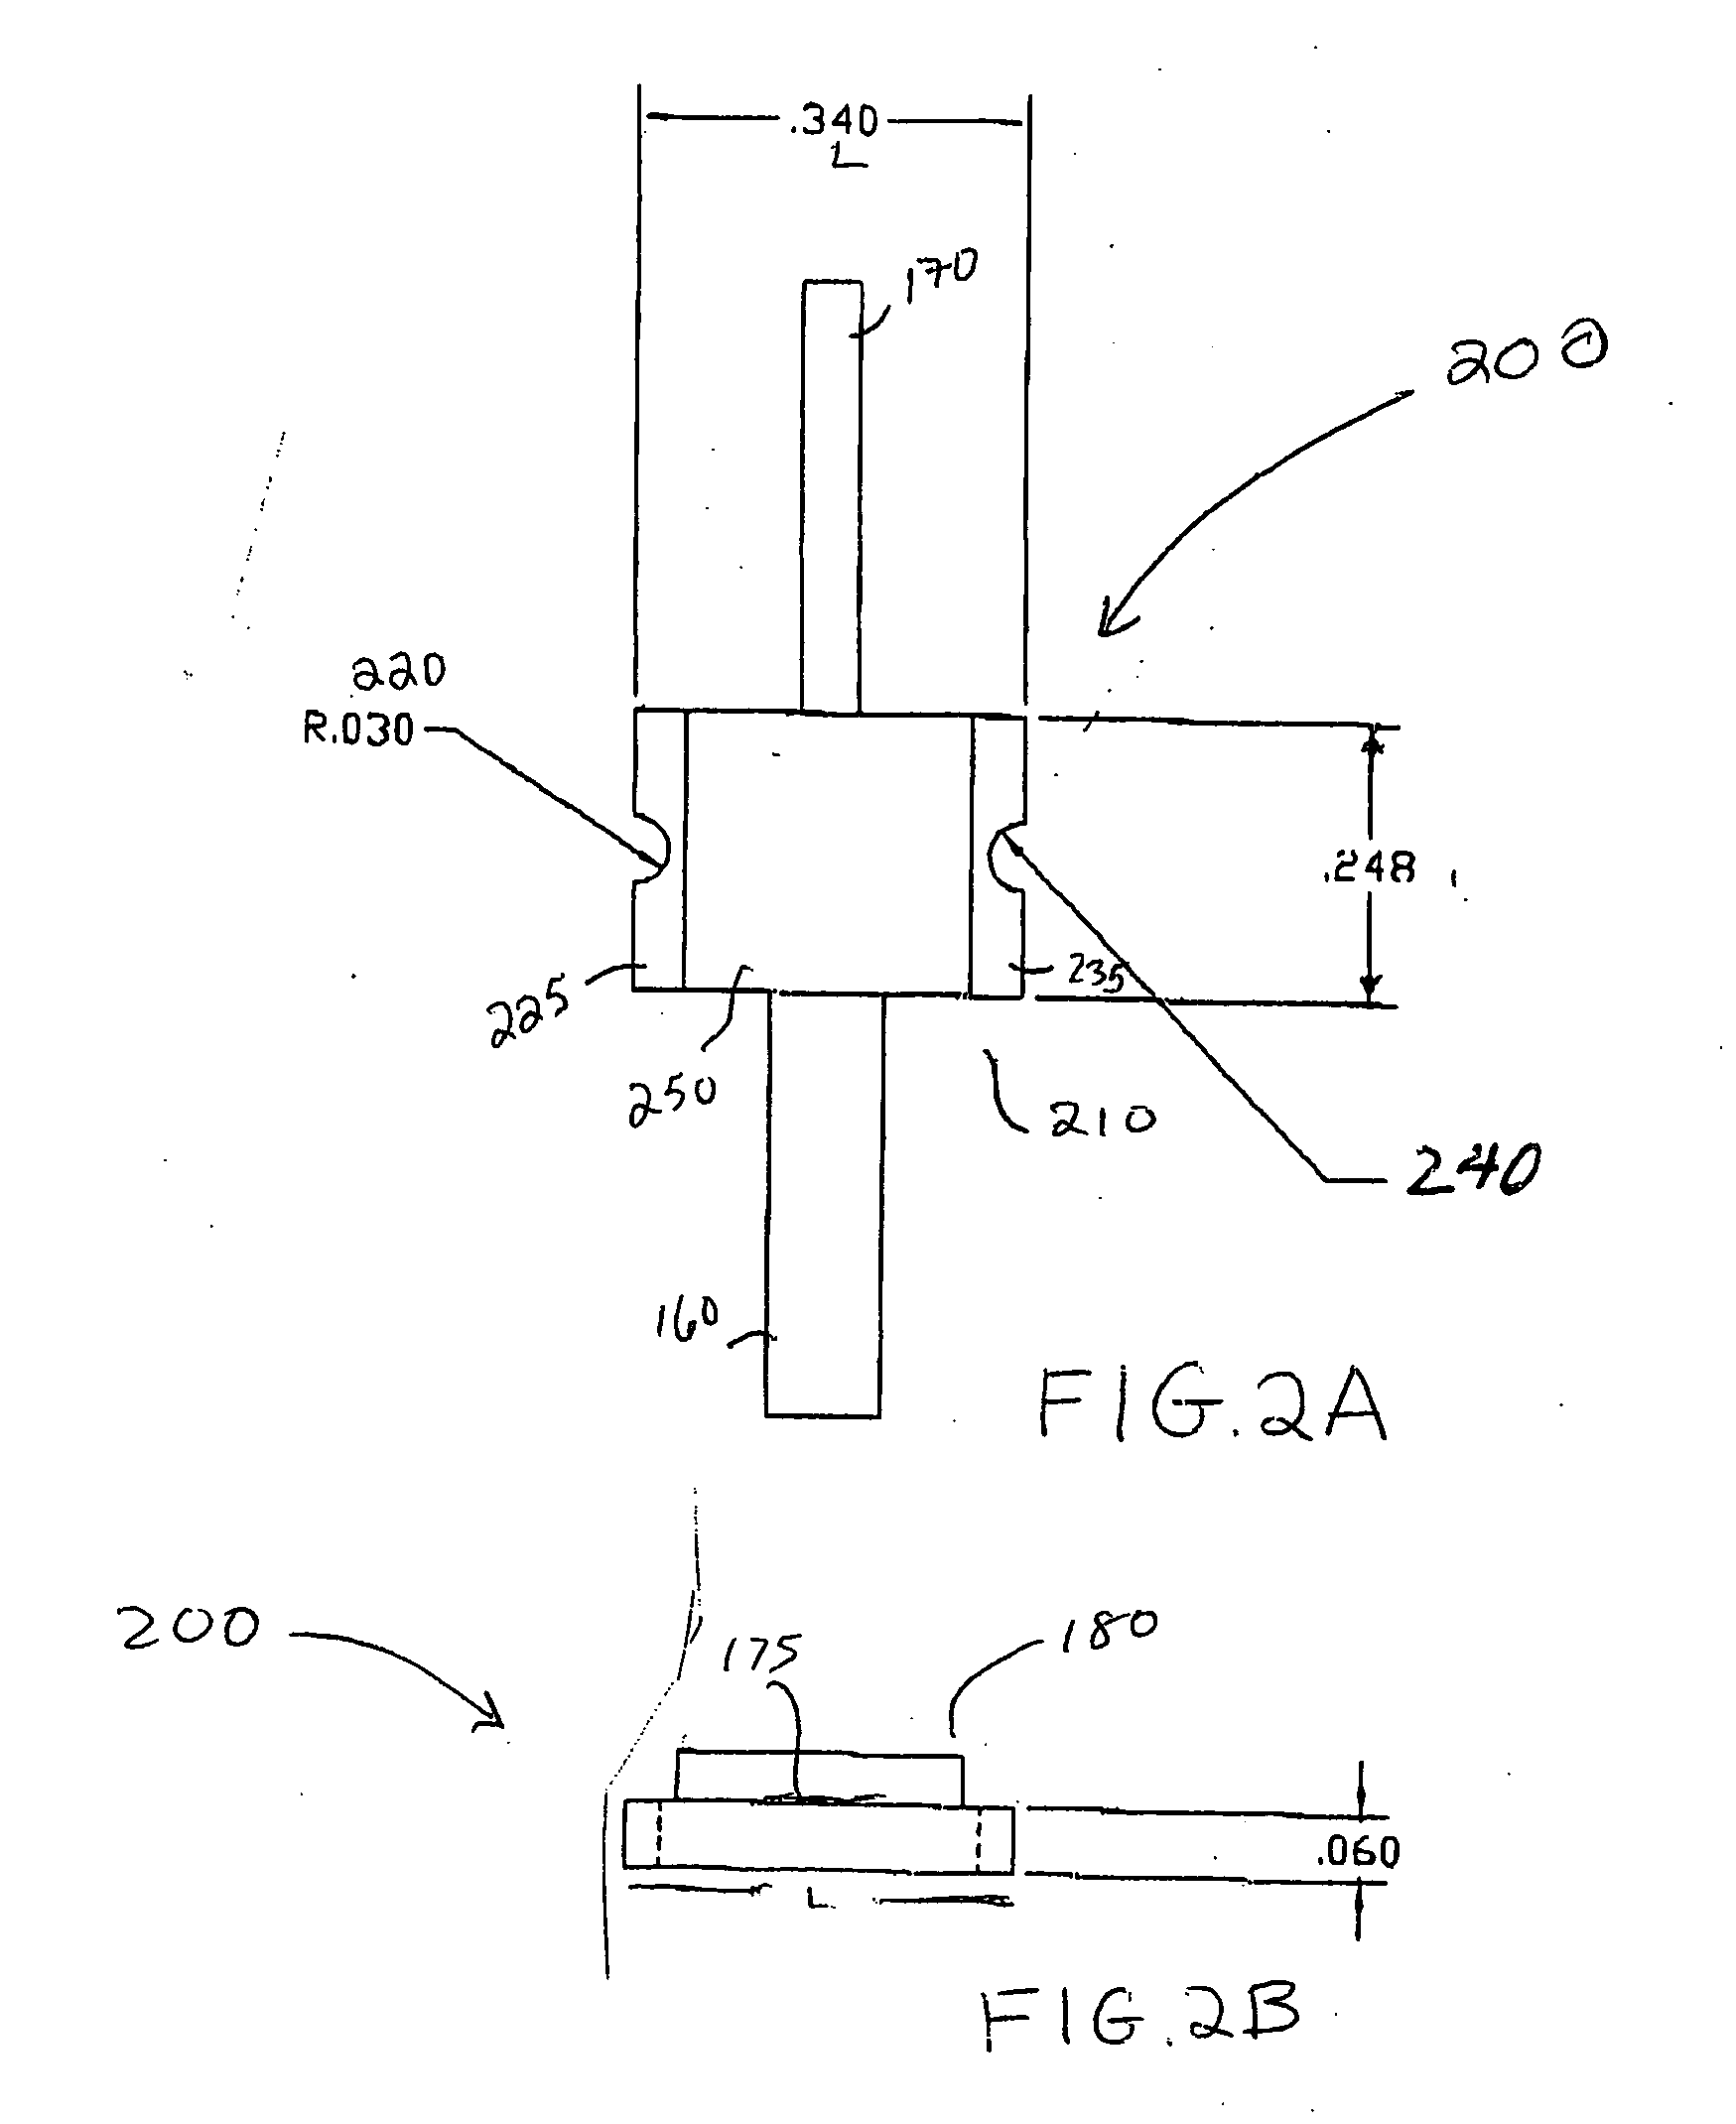 Electronic device package heat sink assembly